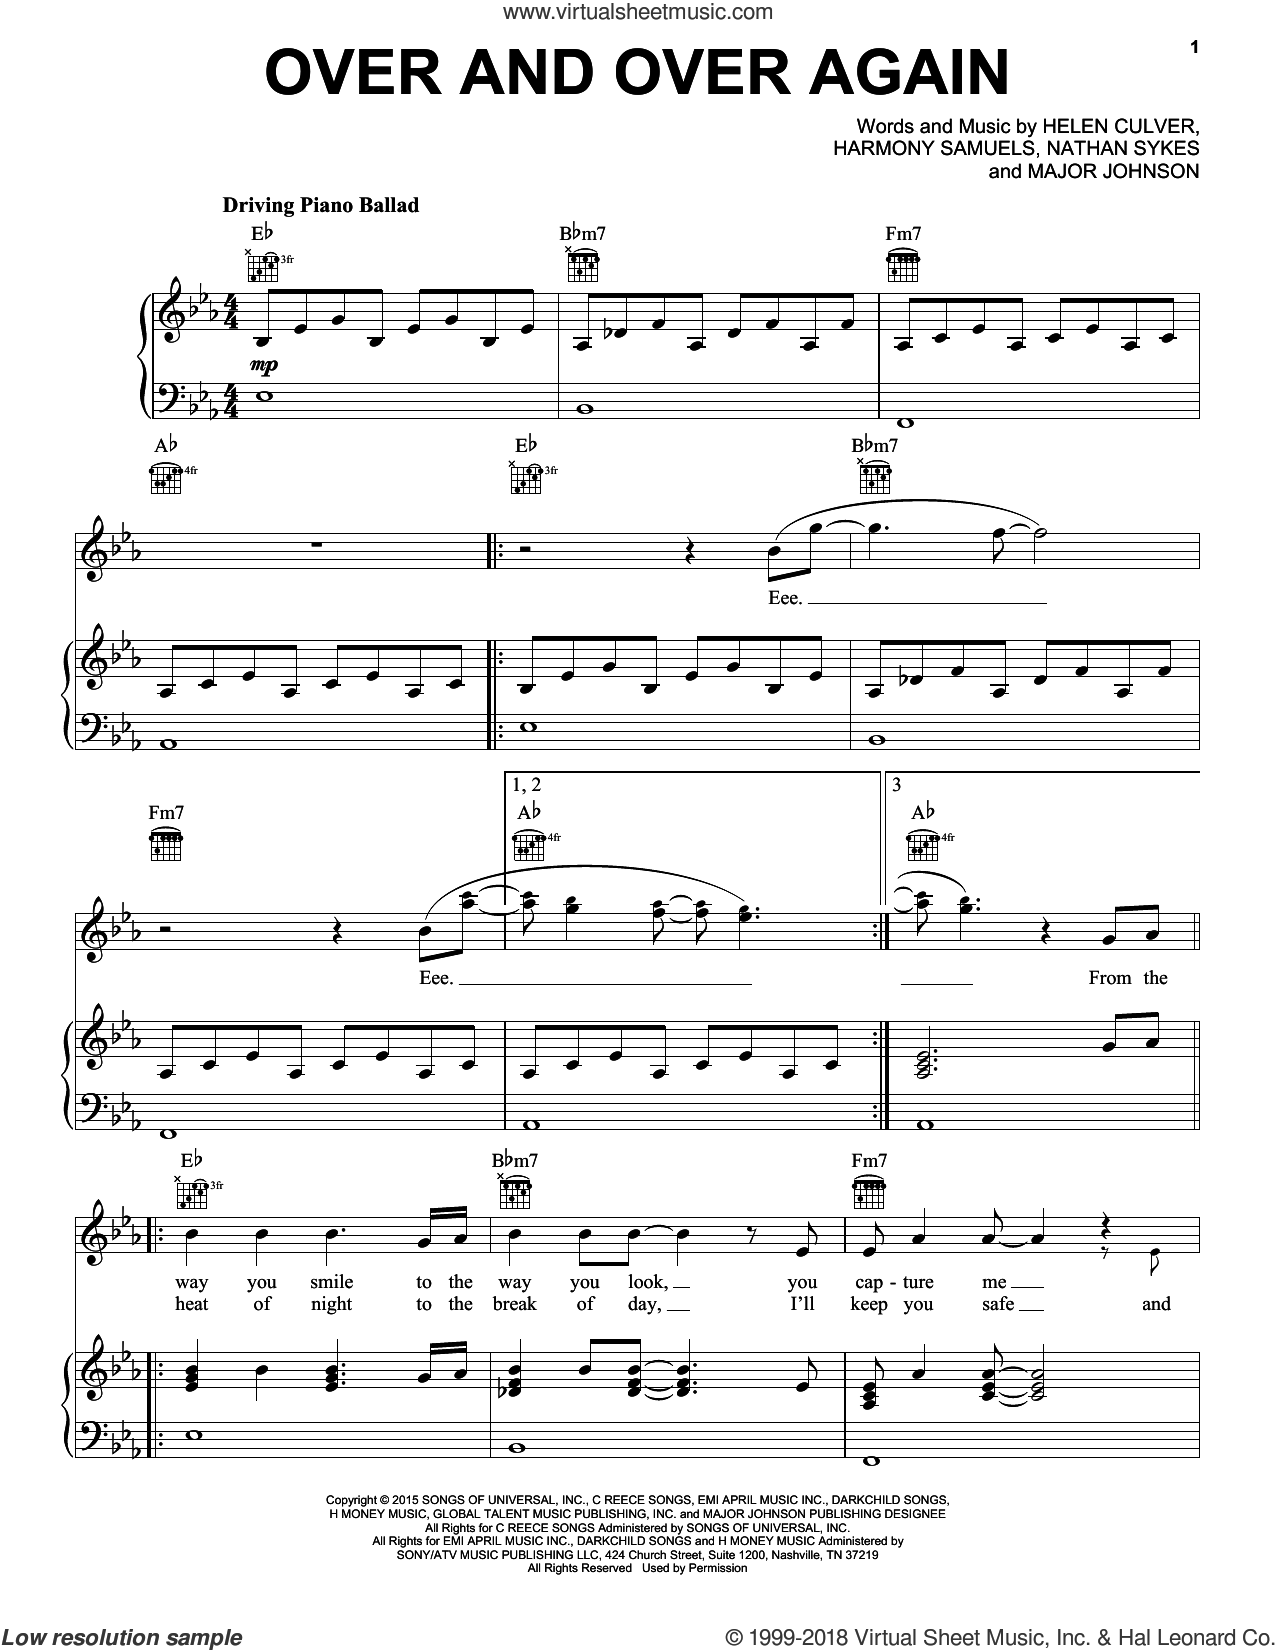 Over And Over Again sheet music for voice, piano or guitar